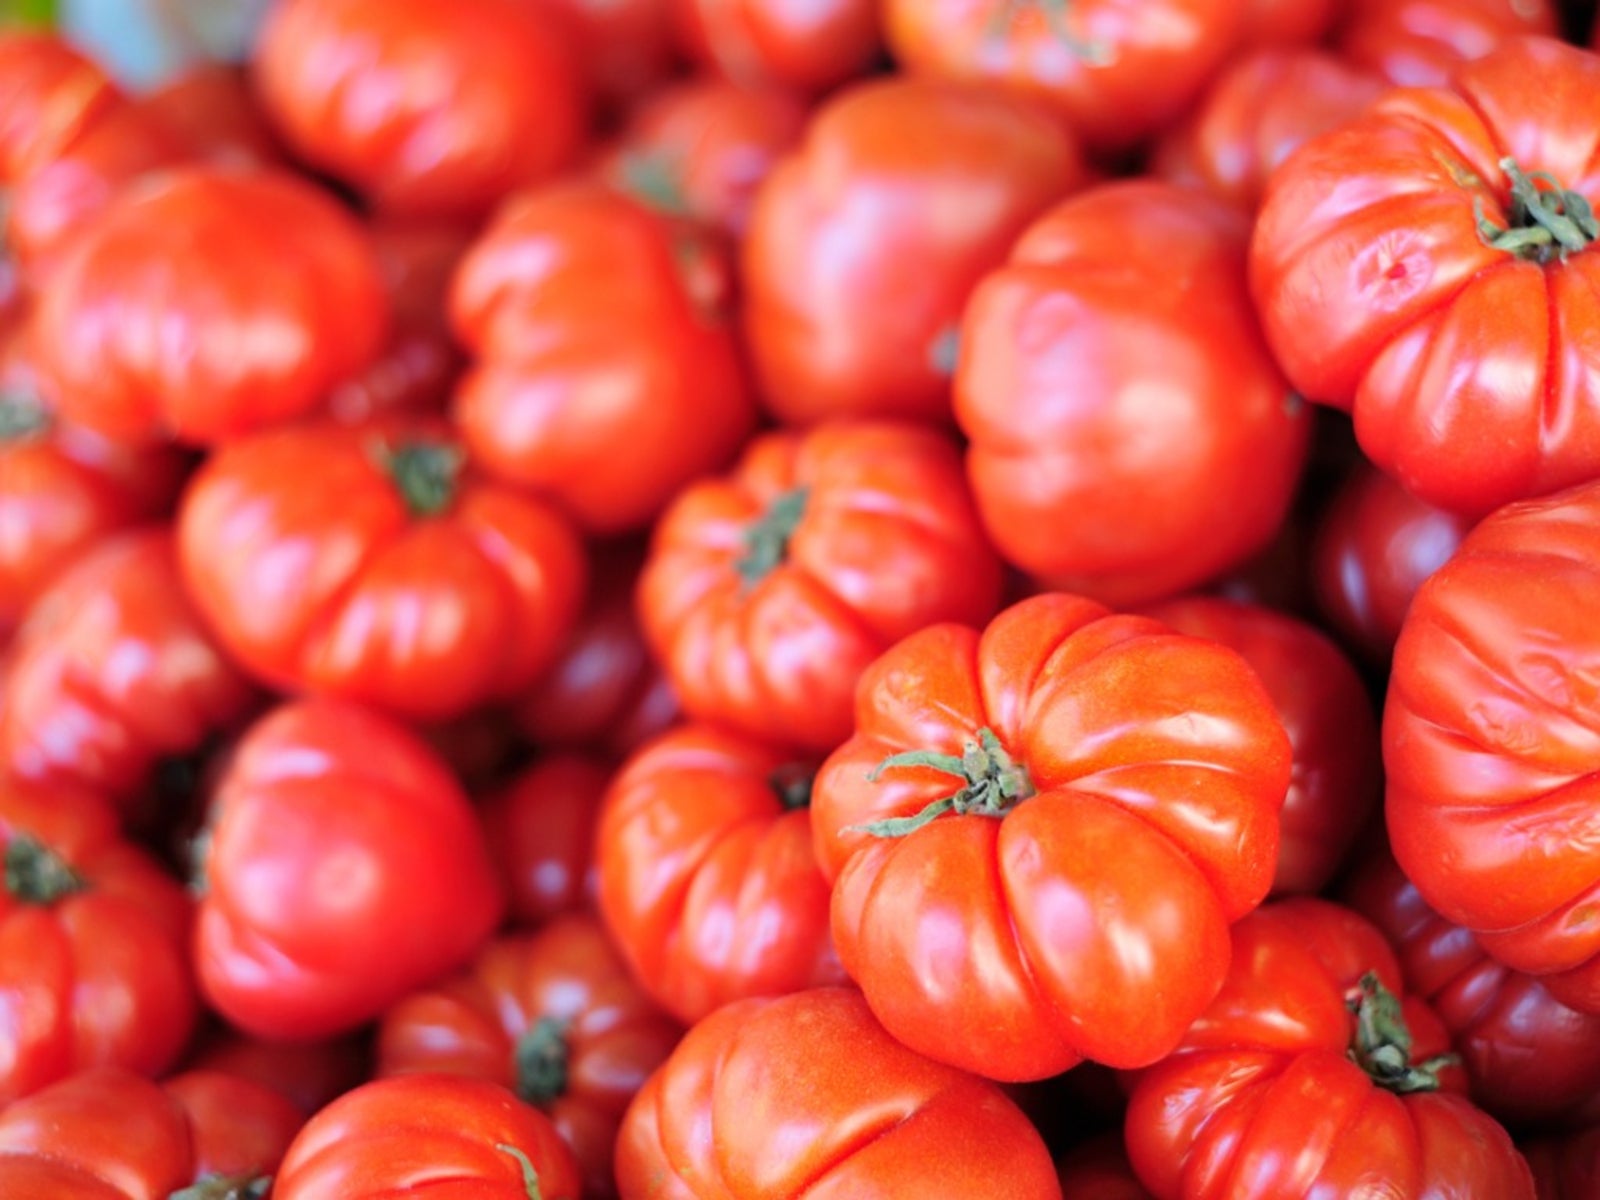 Planting Beefsteak Tomatoes: How To Grow Beefsteak Tomatoes | Gardening  Know How